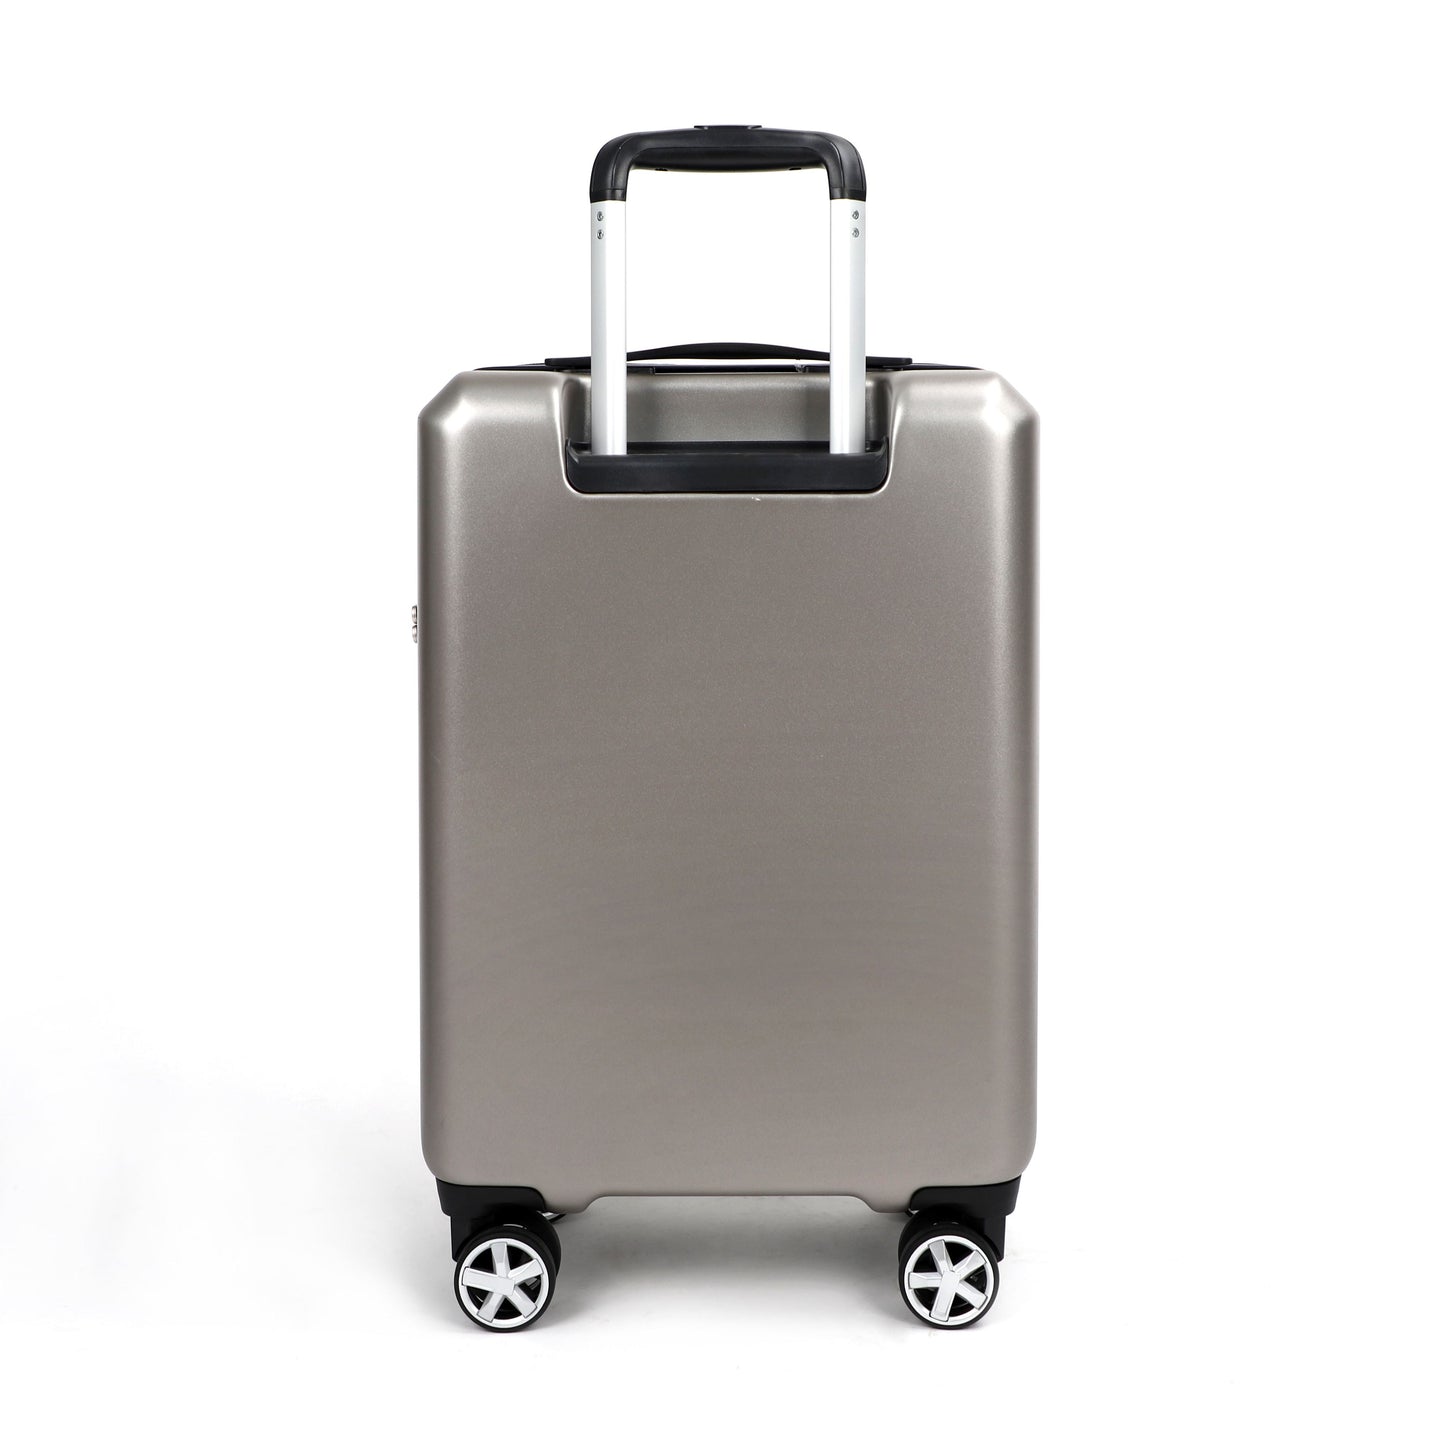 Airline_Carry_On_Luggage_iron_grey_rear_view_T1978155101